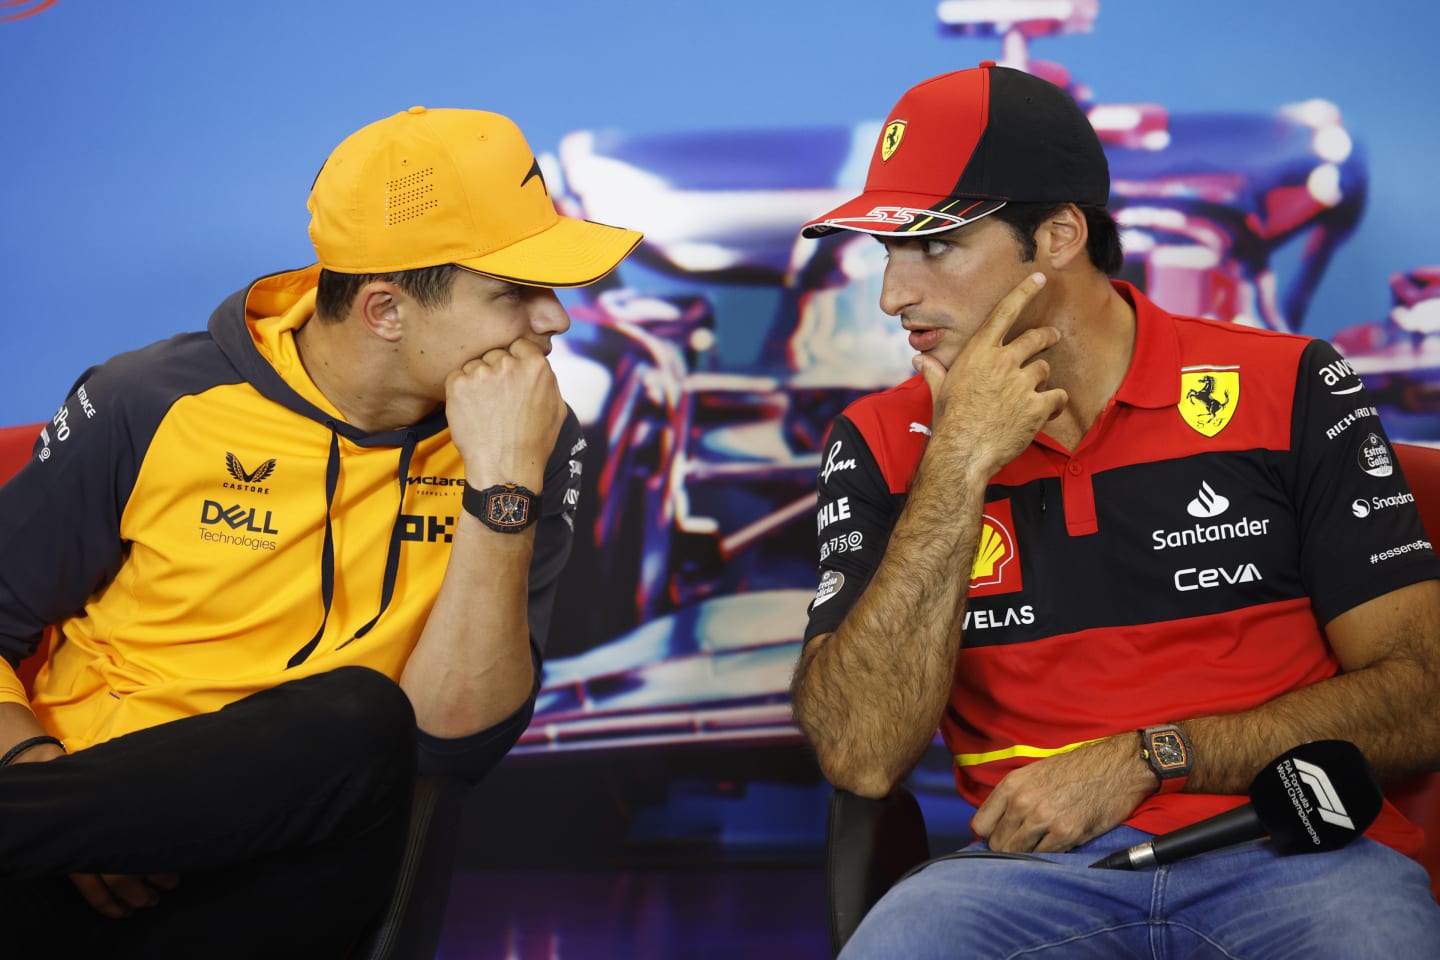 AUSTIN, TEXAS - OCTOBER 20: Lando Norris of Great Britain and McLaren and Carlos Sainz of Spain and Ferrari talk in the Drivers Press Conference during previews ahead of the F1 Grand Prix of USA at Circuit of The Americas on October 20, 2022 in Austin, Texas. (Photo by Jared C. Tilton/Getty Images)